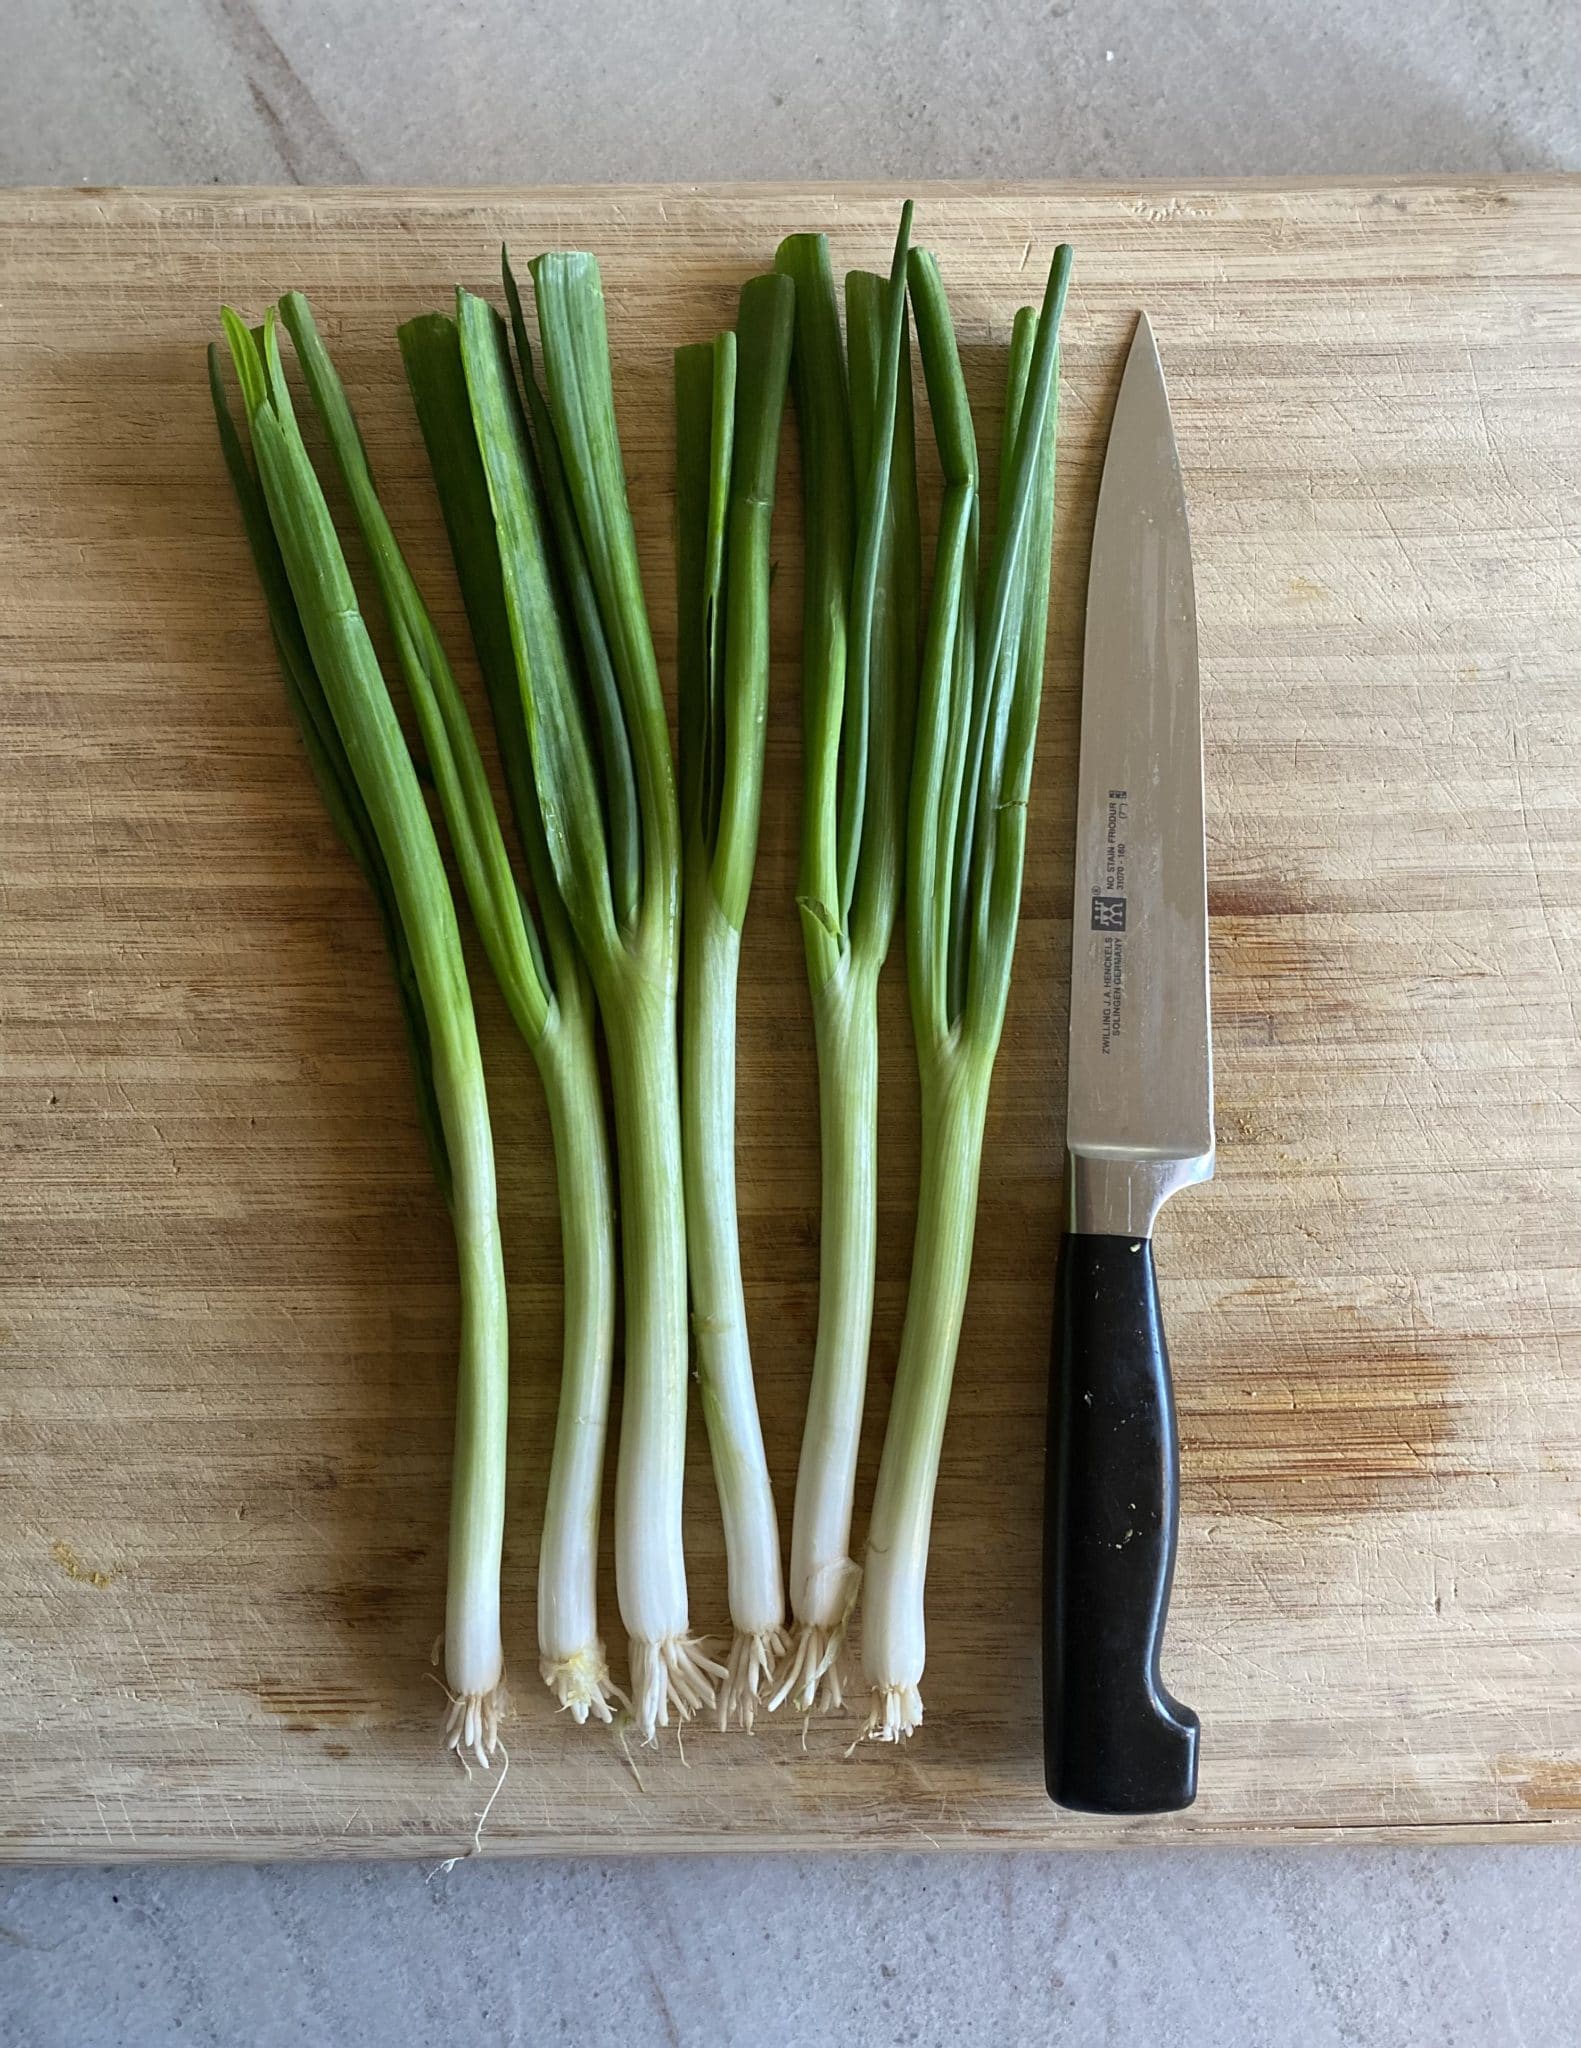 Six green scallions lined up on a wooden cutting board with a chopping knife to the right.